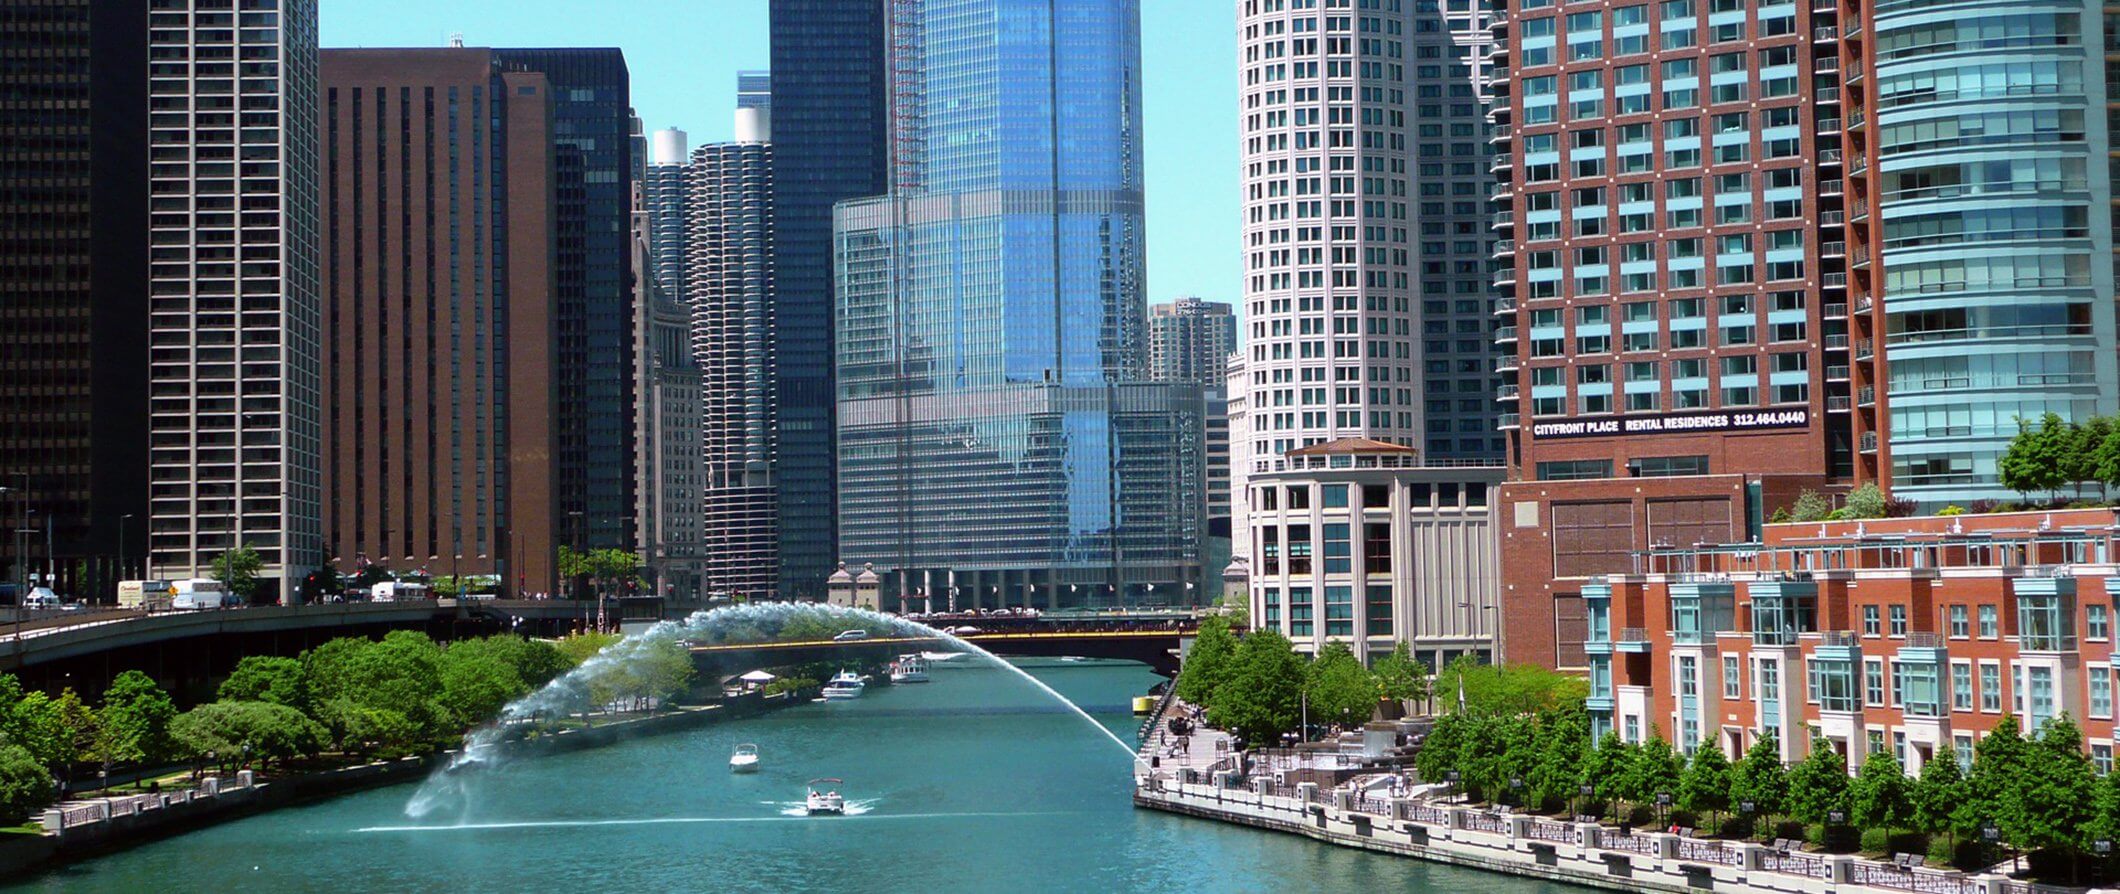 city view of Chicago. River running through the center of image with tall buildings either side.